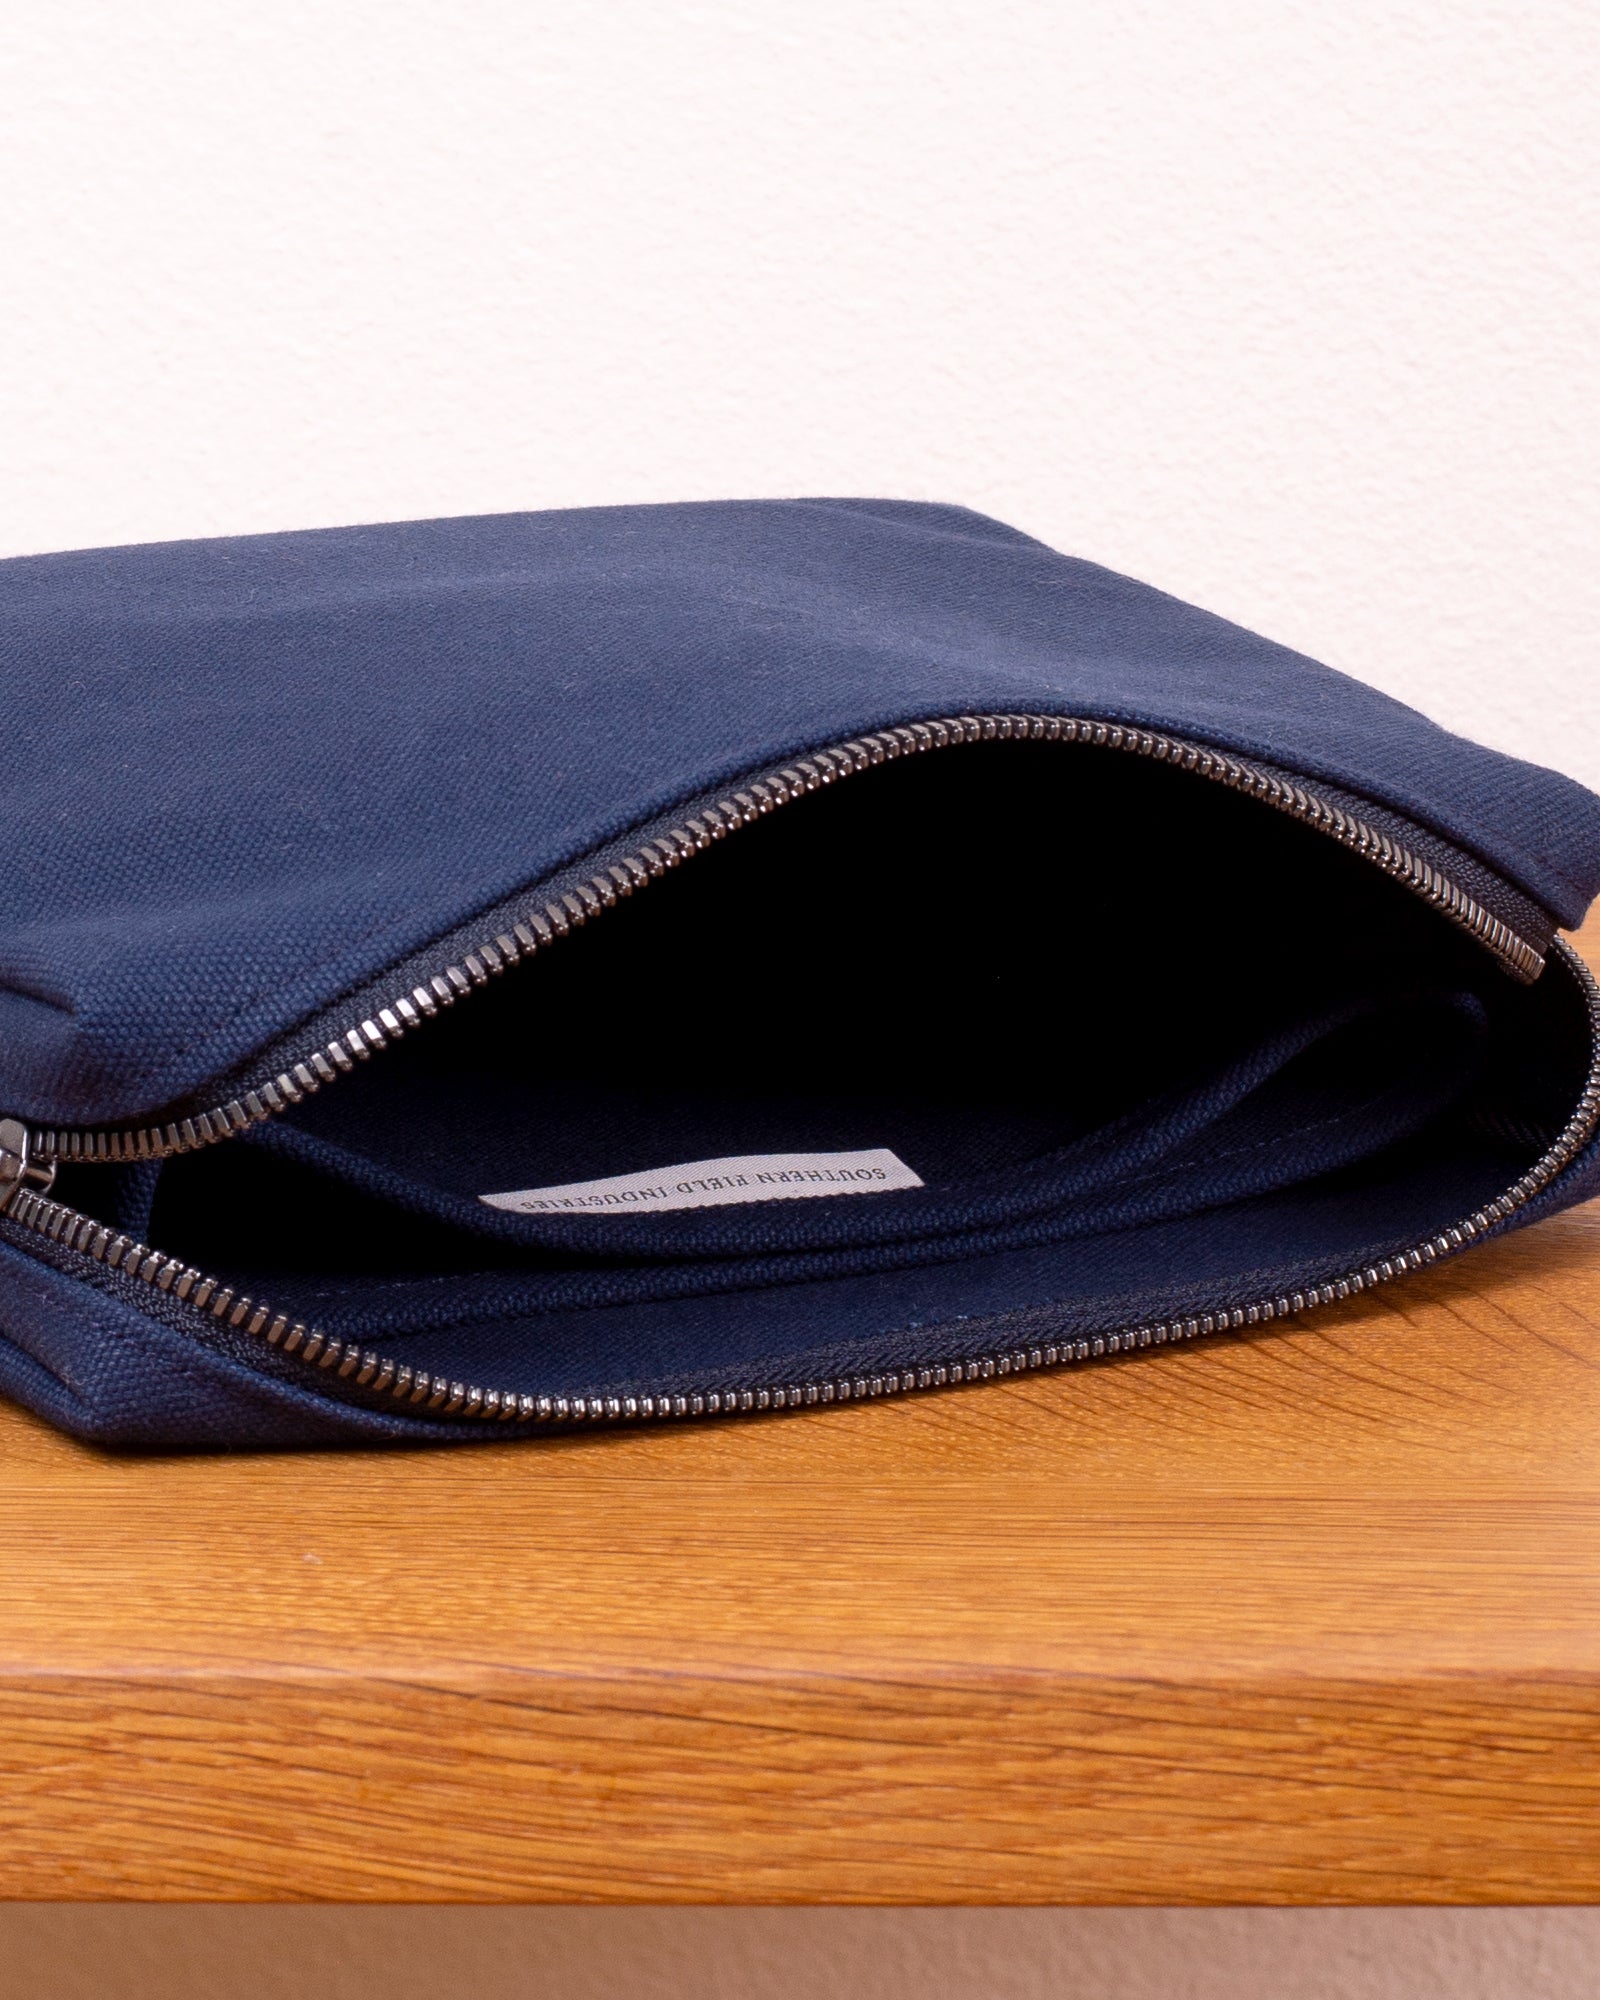 UTILITY POUCH 240 - Navy